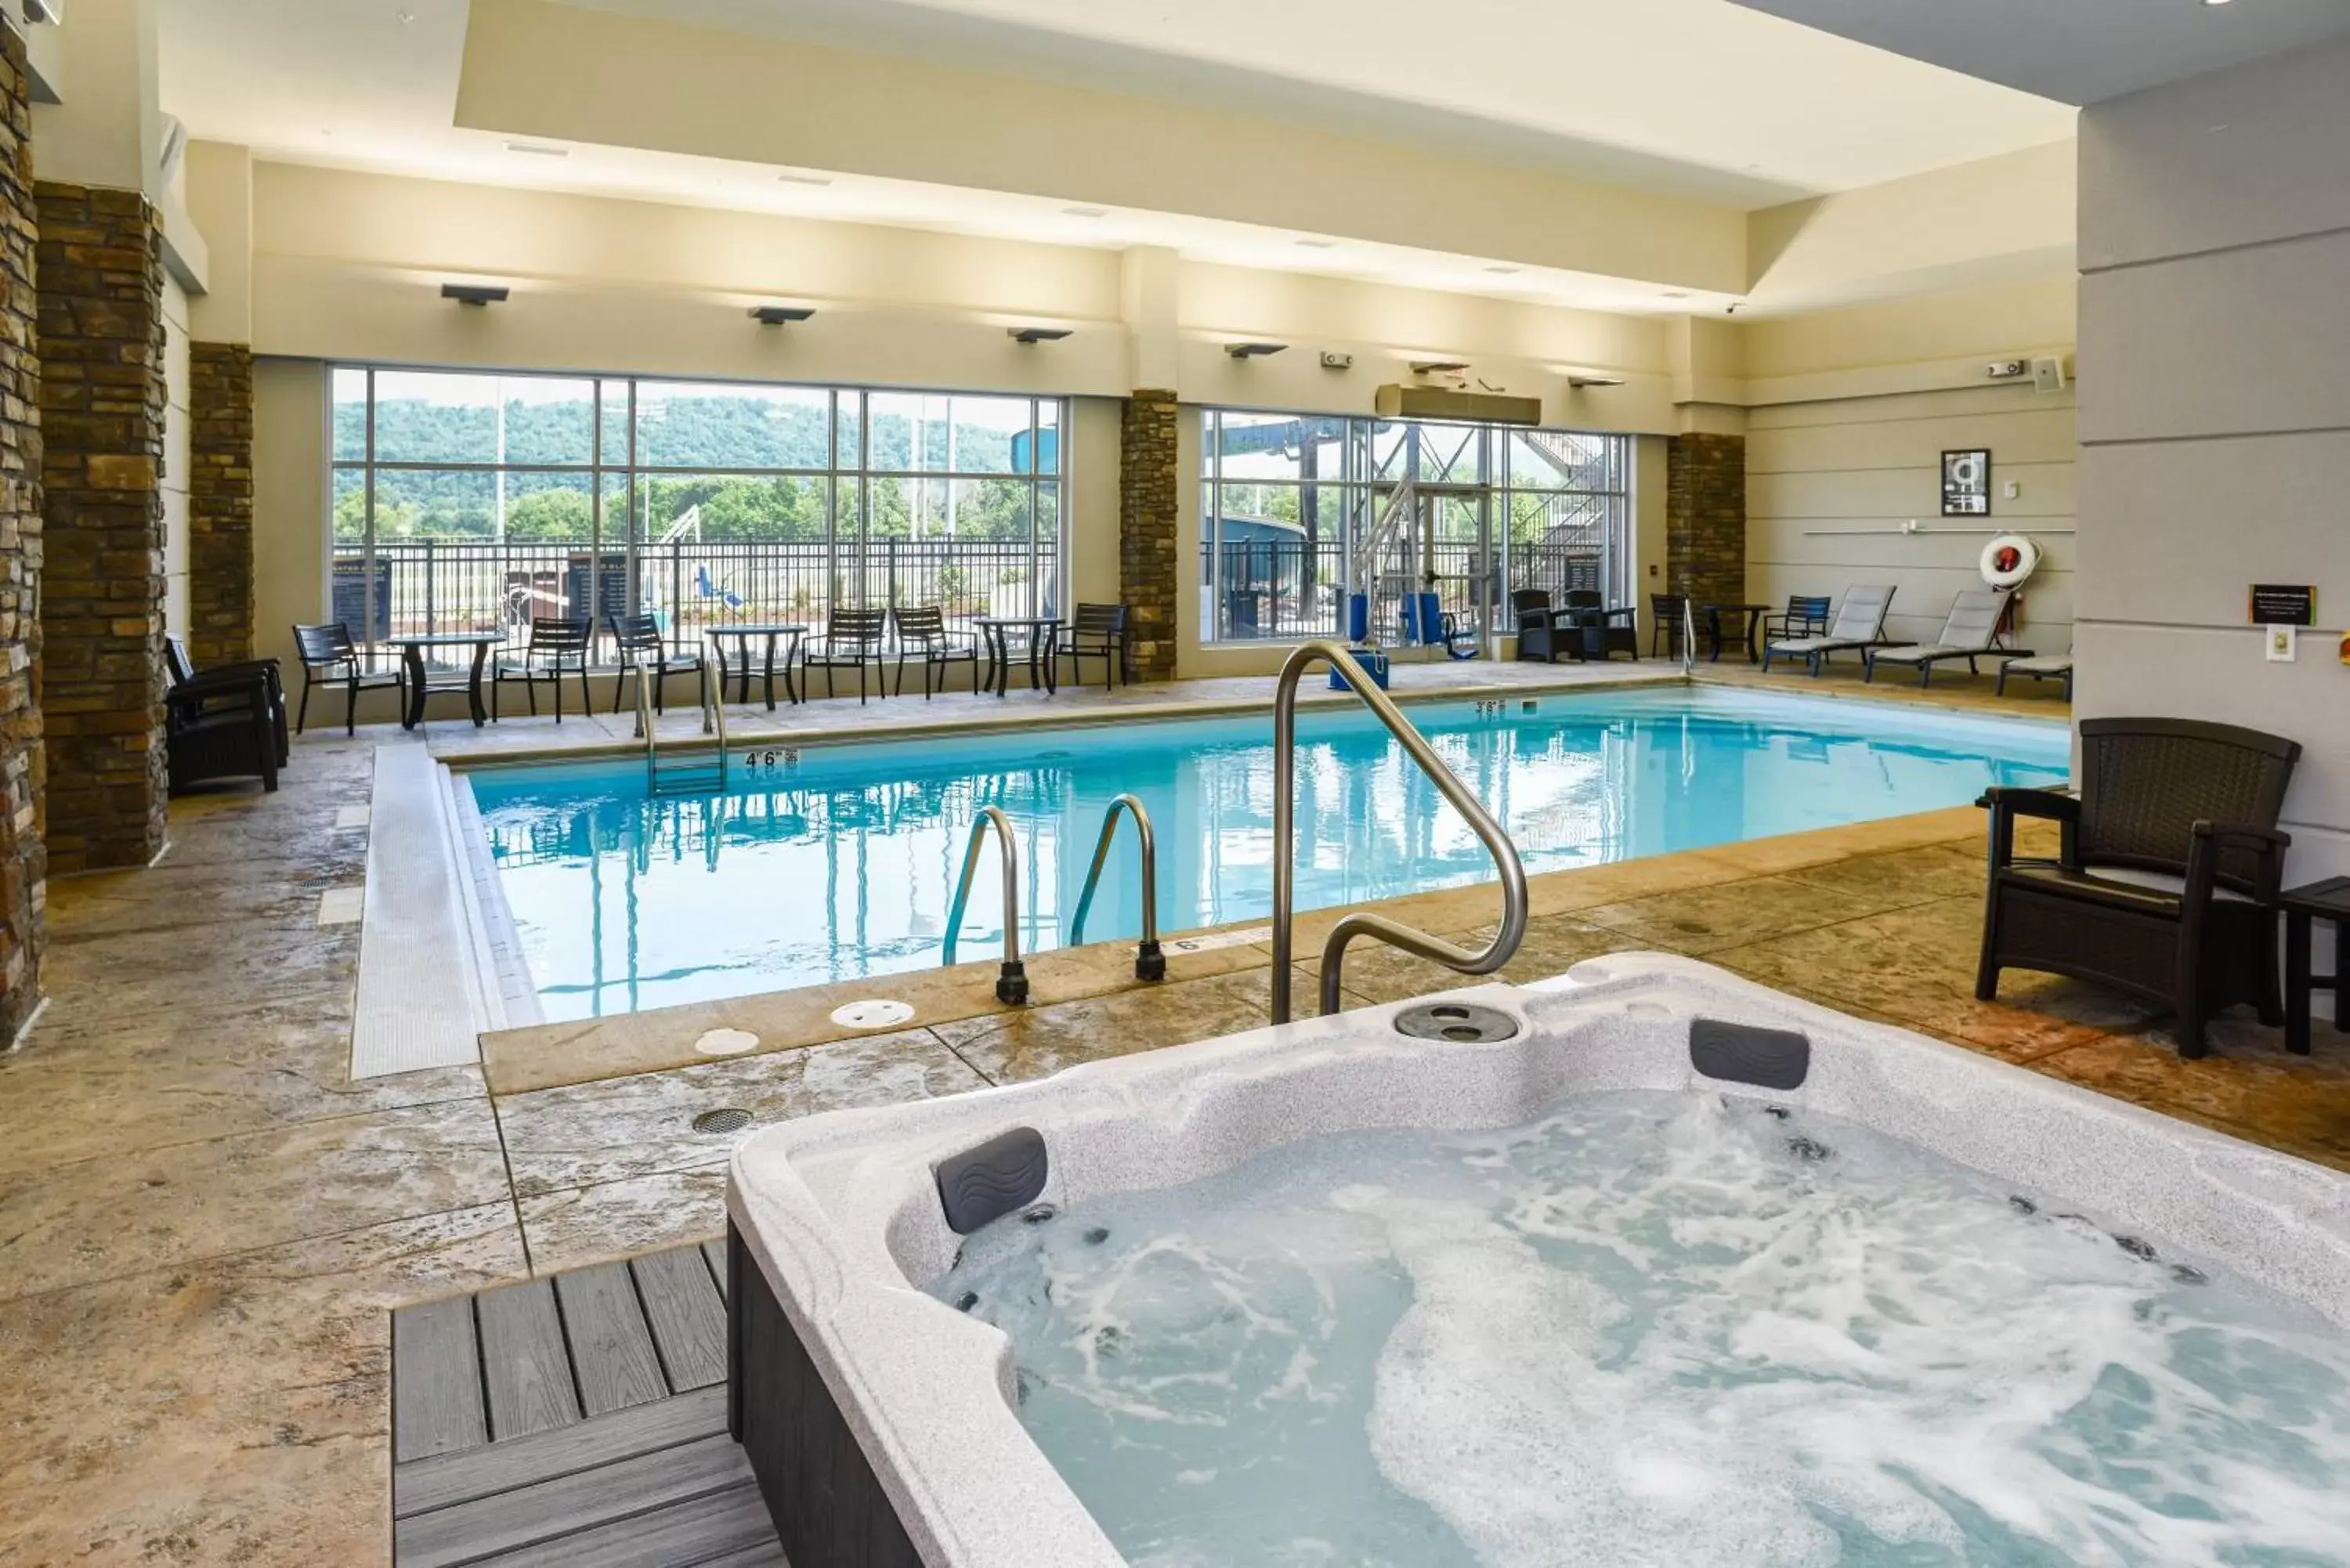 Hot Tub, Swimming Pool in Tioga Downs Casino and Resort